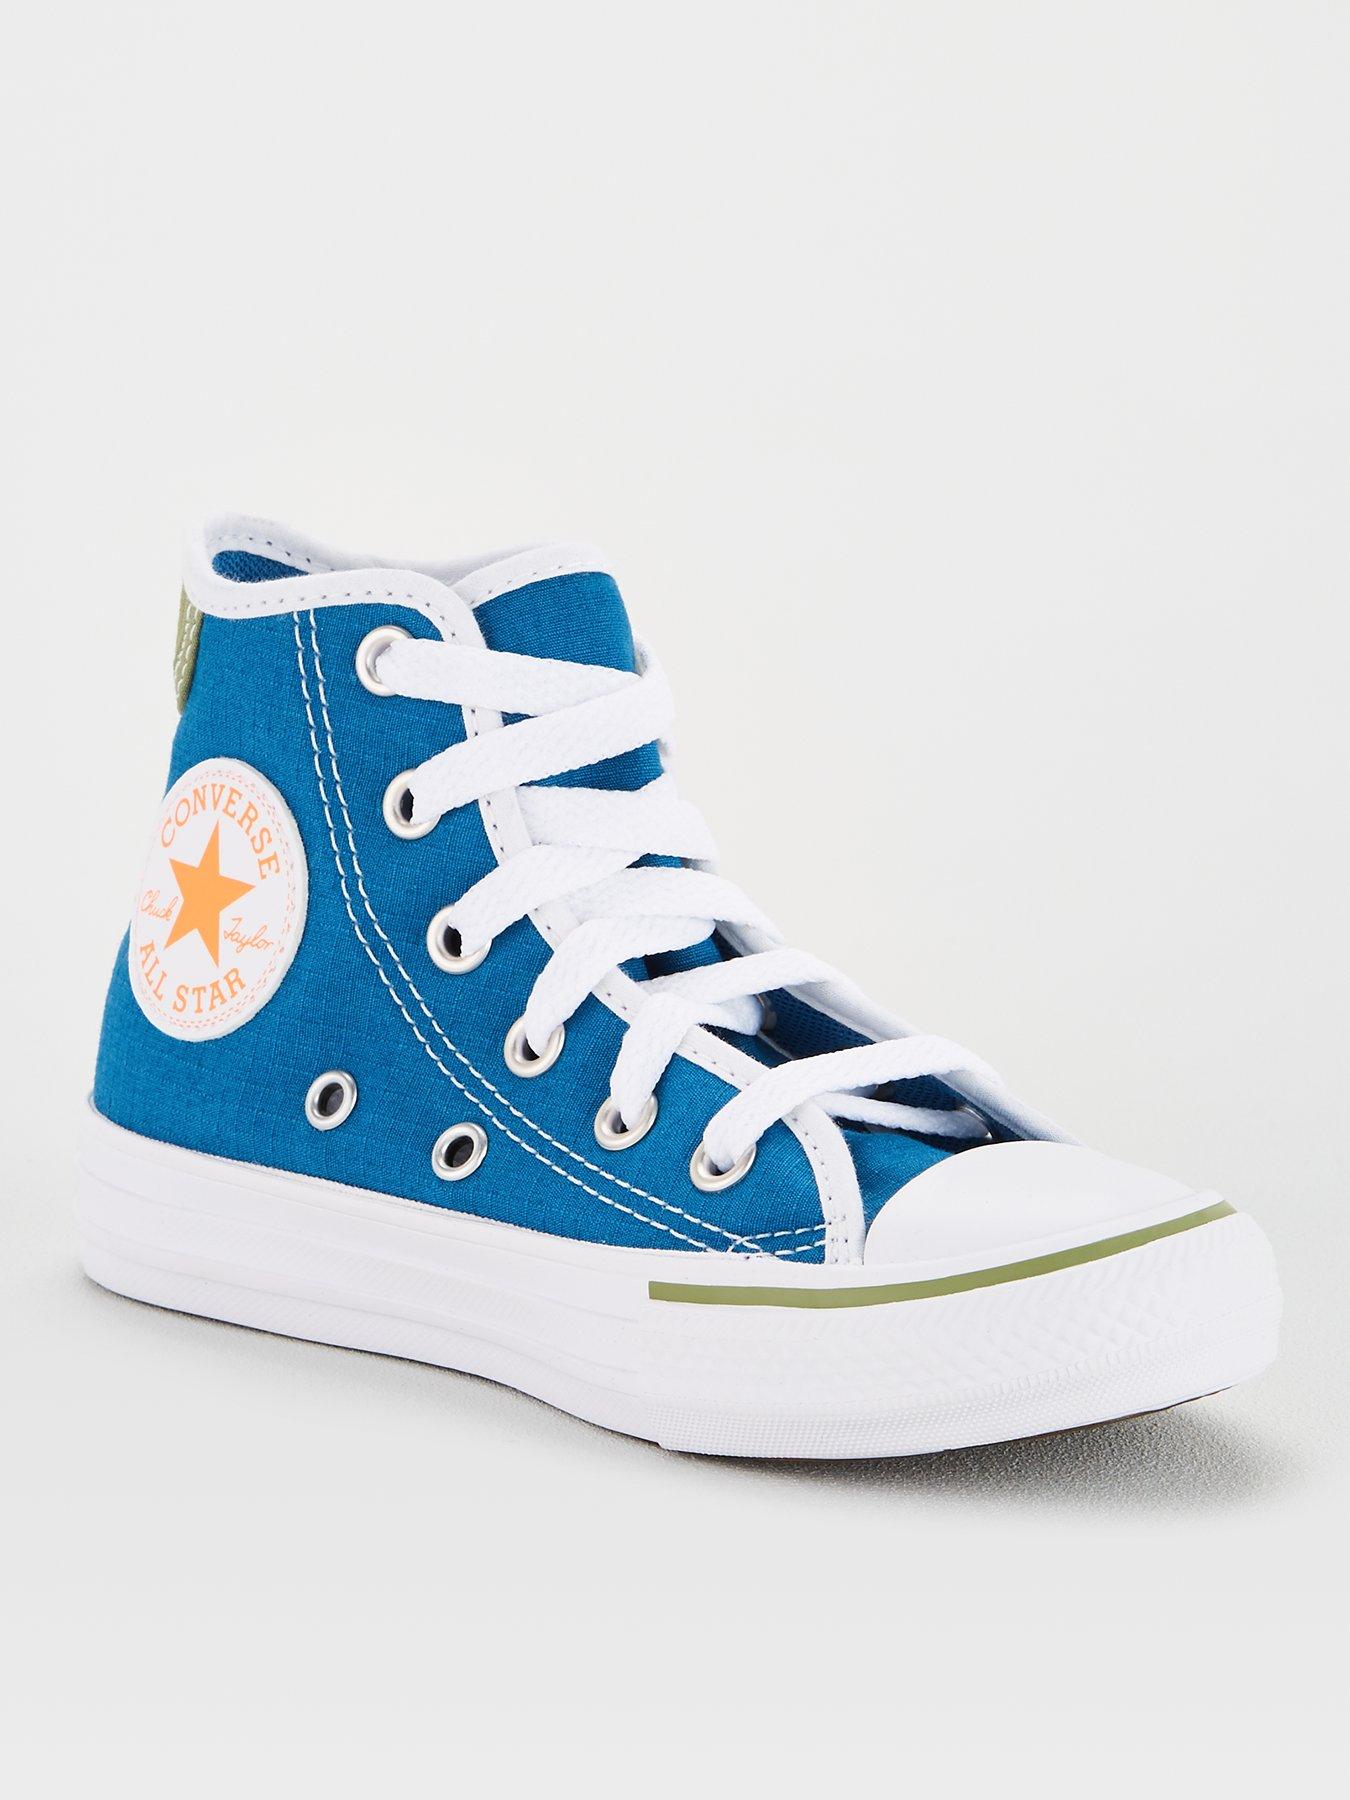 Girls' Shoes CONVERSE All Star Blue 